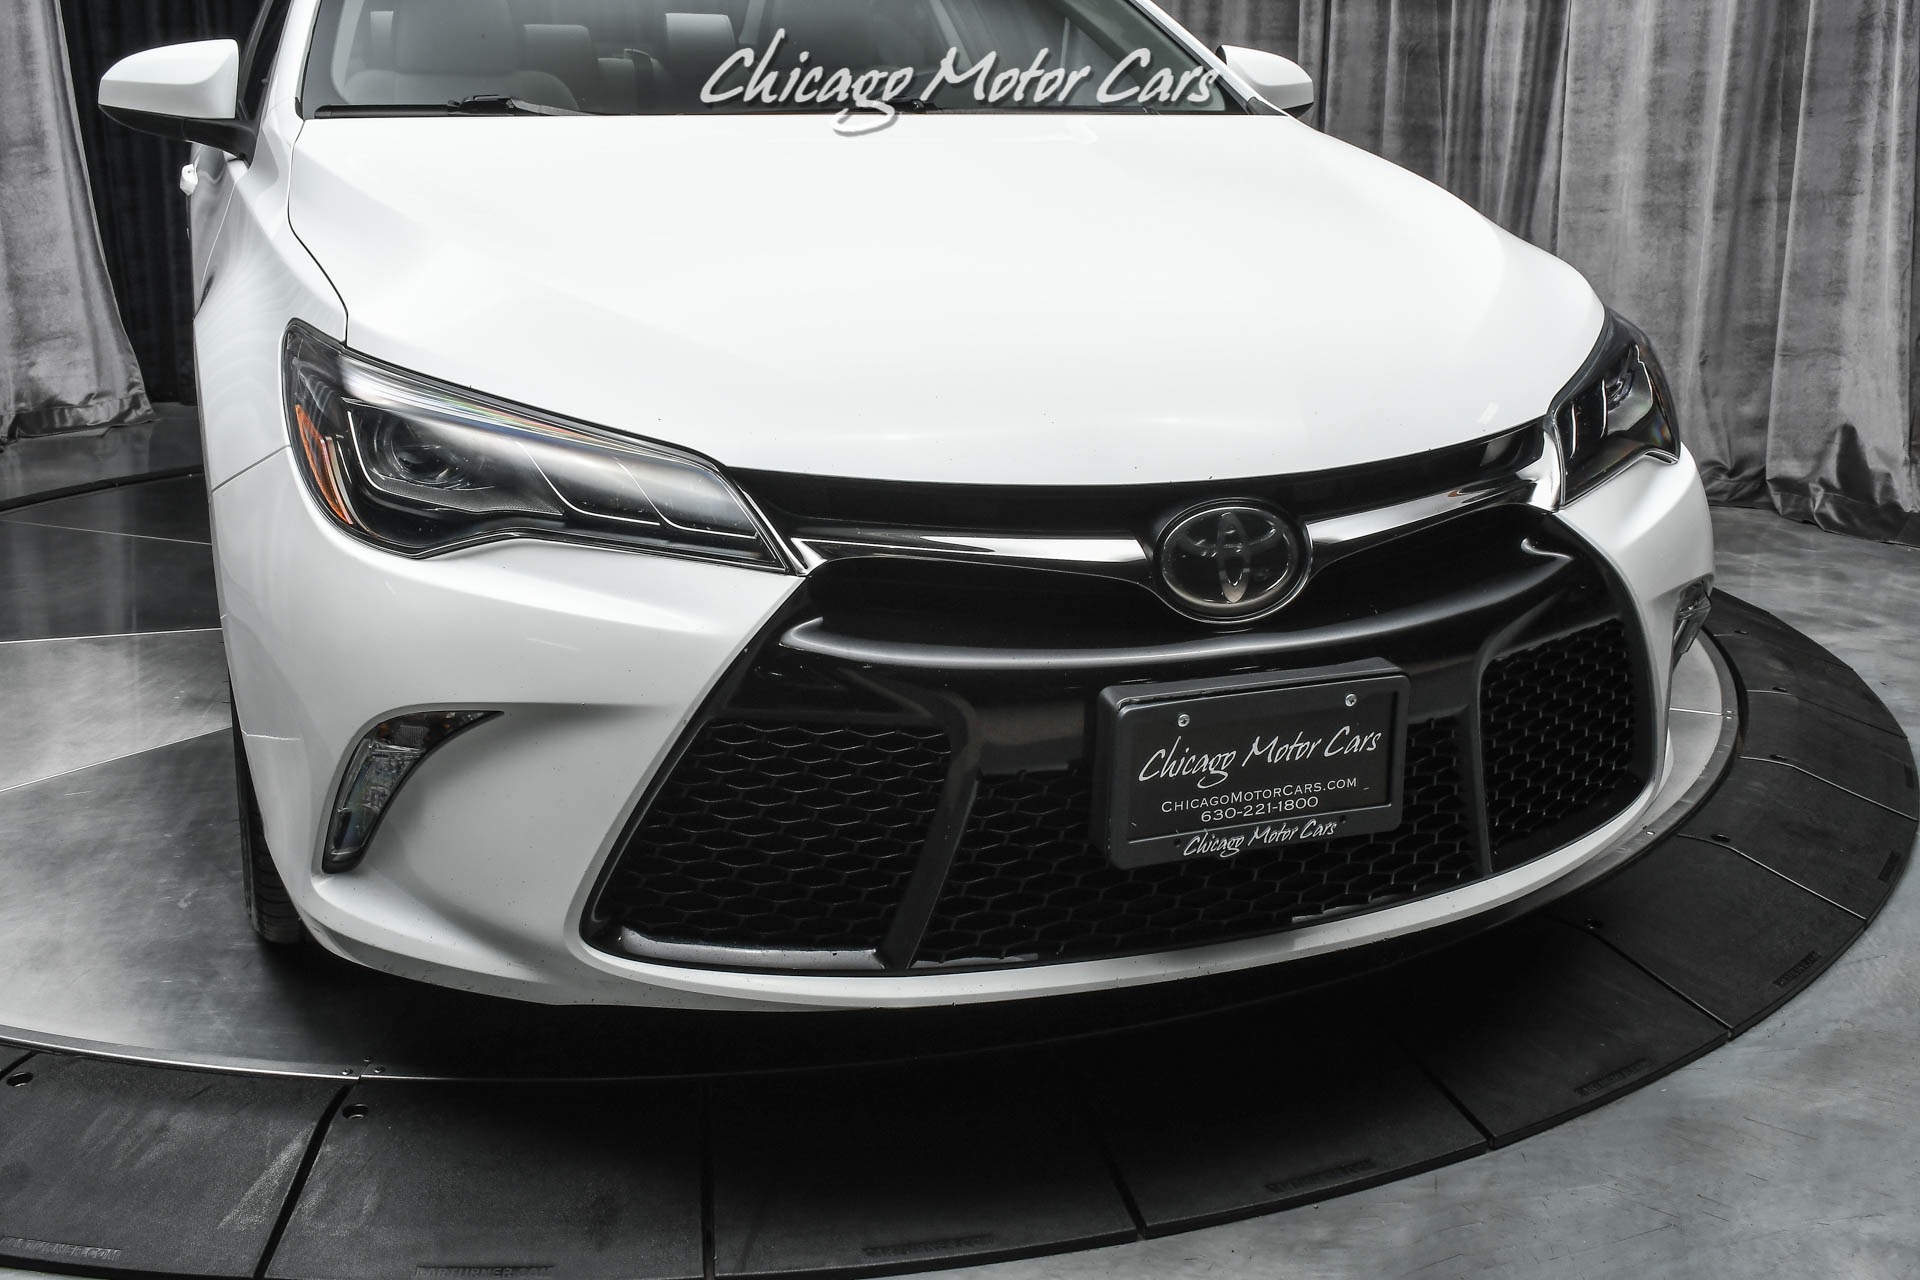 Used-2015-Toyota-Camry-XSE-V6-Navigation-JBL-Upgraded-Audio-Technology-Package